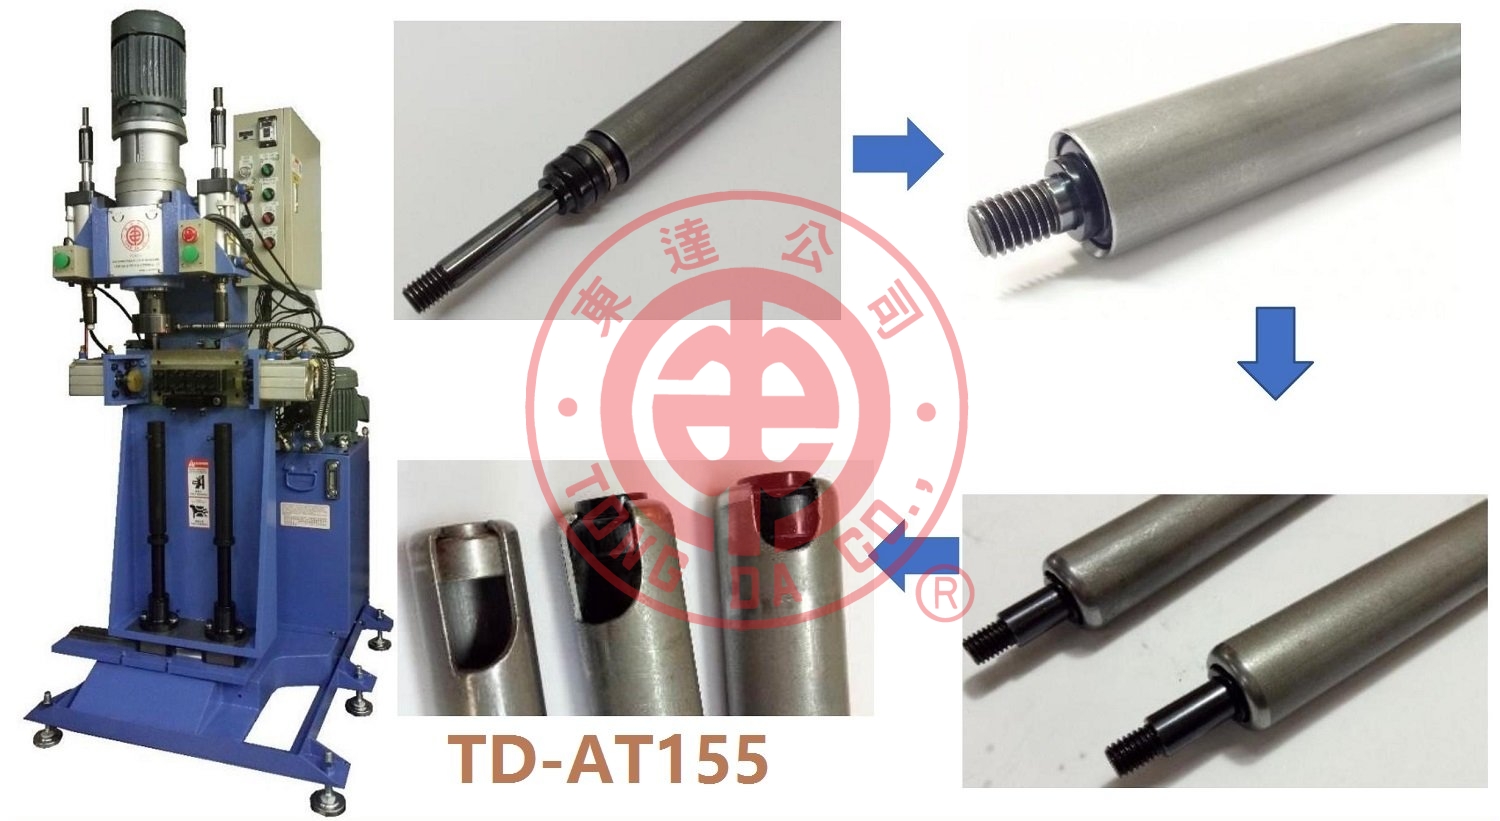 TD-AT155 PRESS GAS SPRING COMPONENTS AND CLOSING GAS SPRING TUBE MACHINE(FOR GAS SPRING) 1